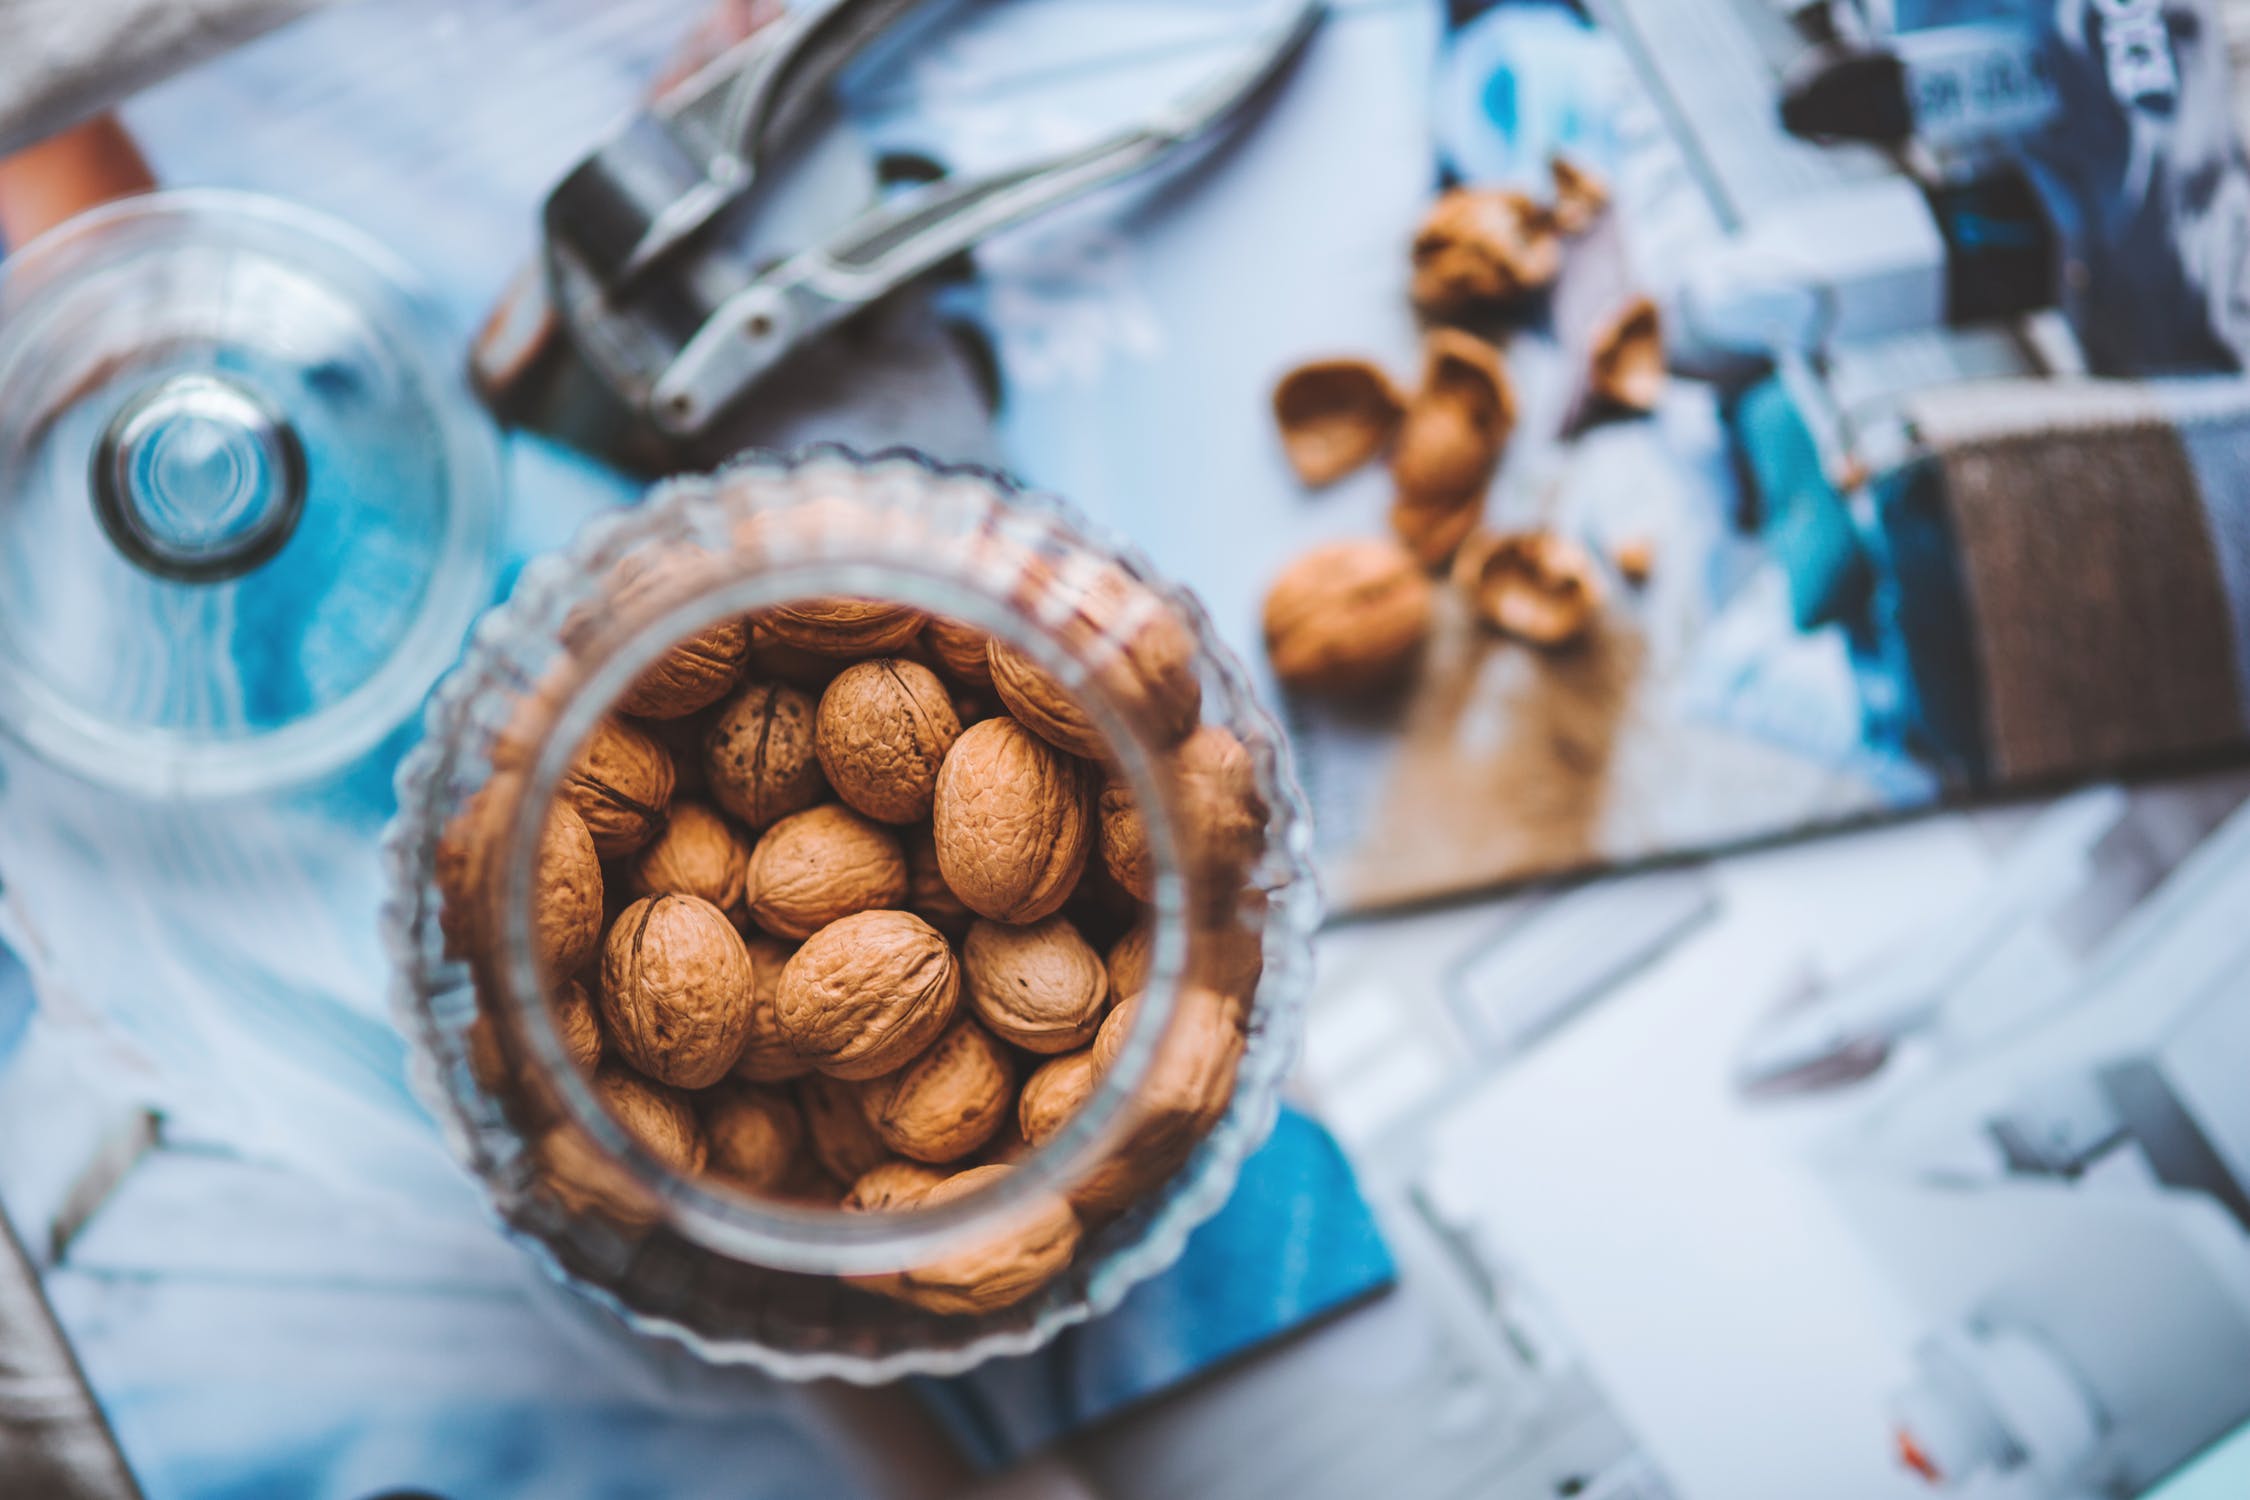 How Walnuts Help Promote Better Health